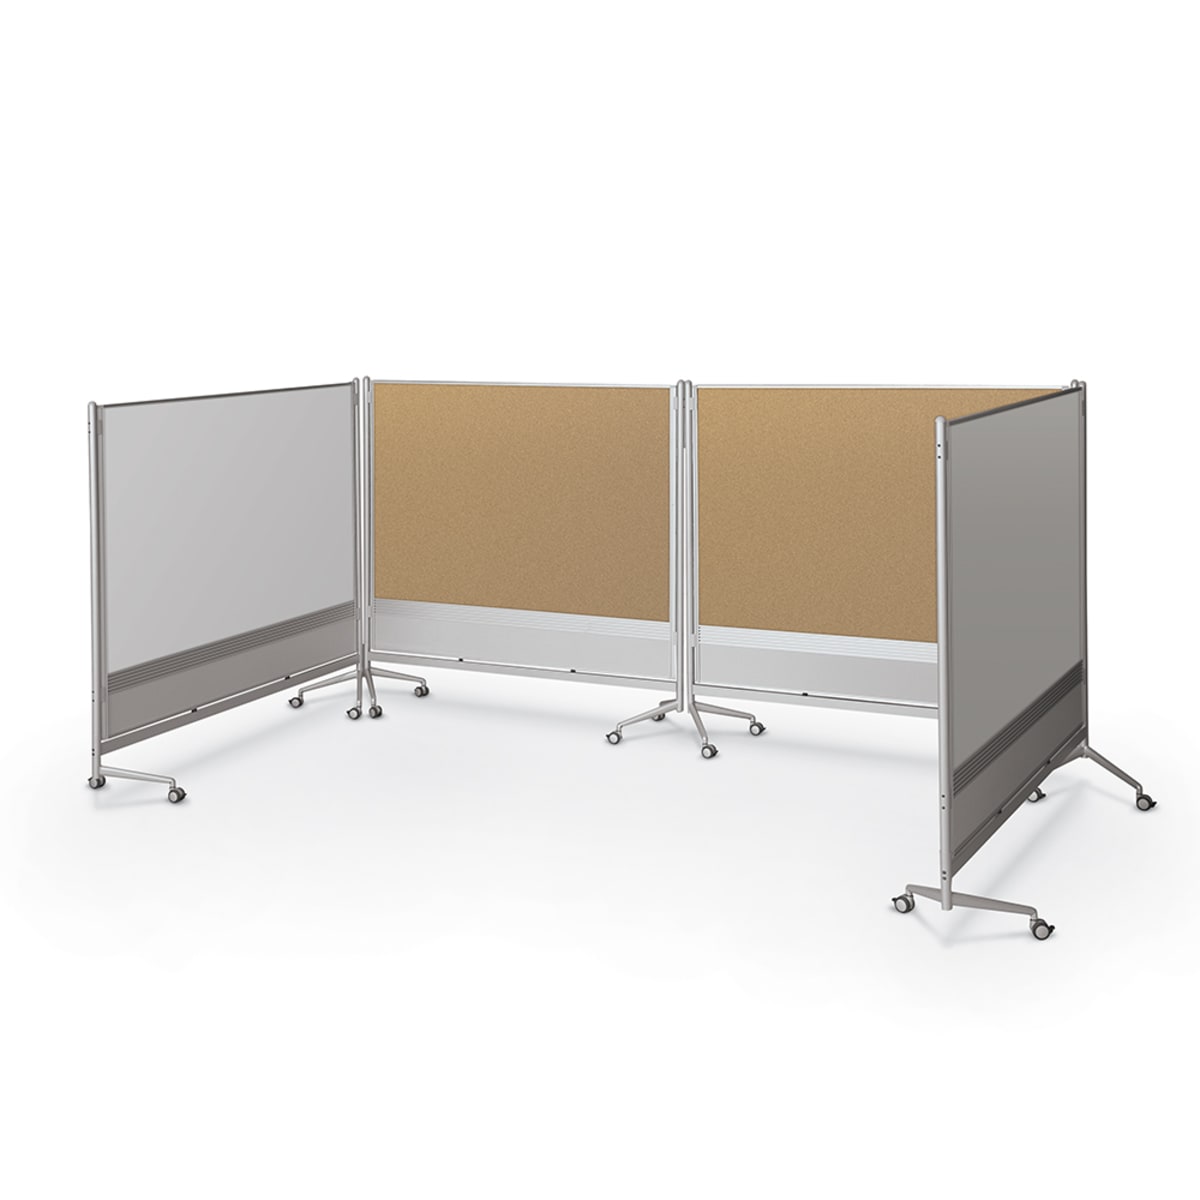 Mooreco Mobile Room Divider & Display Panel Dura-Rite - Natural Cork - 6'H x 6'W (Mooreco 661AG-HC) - SchoolOutlet